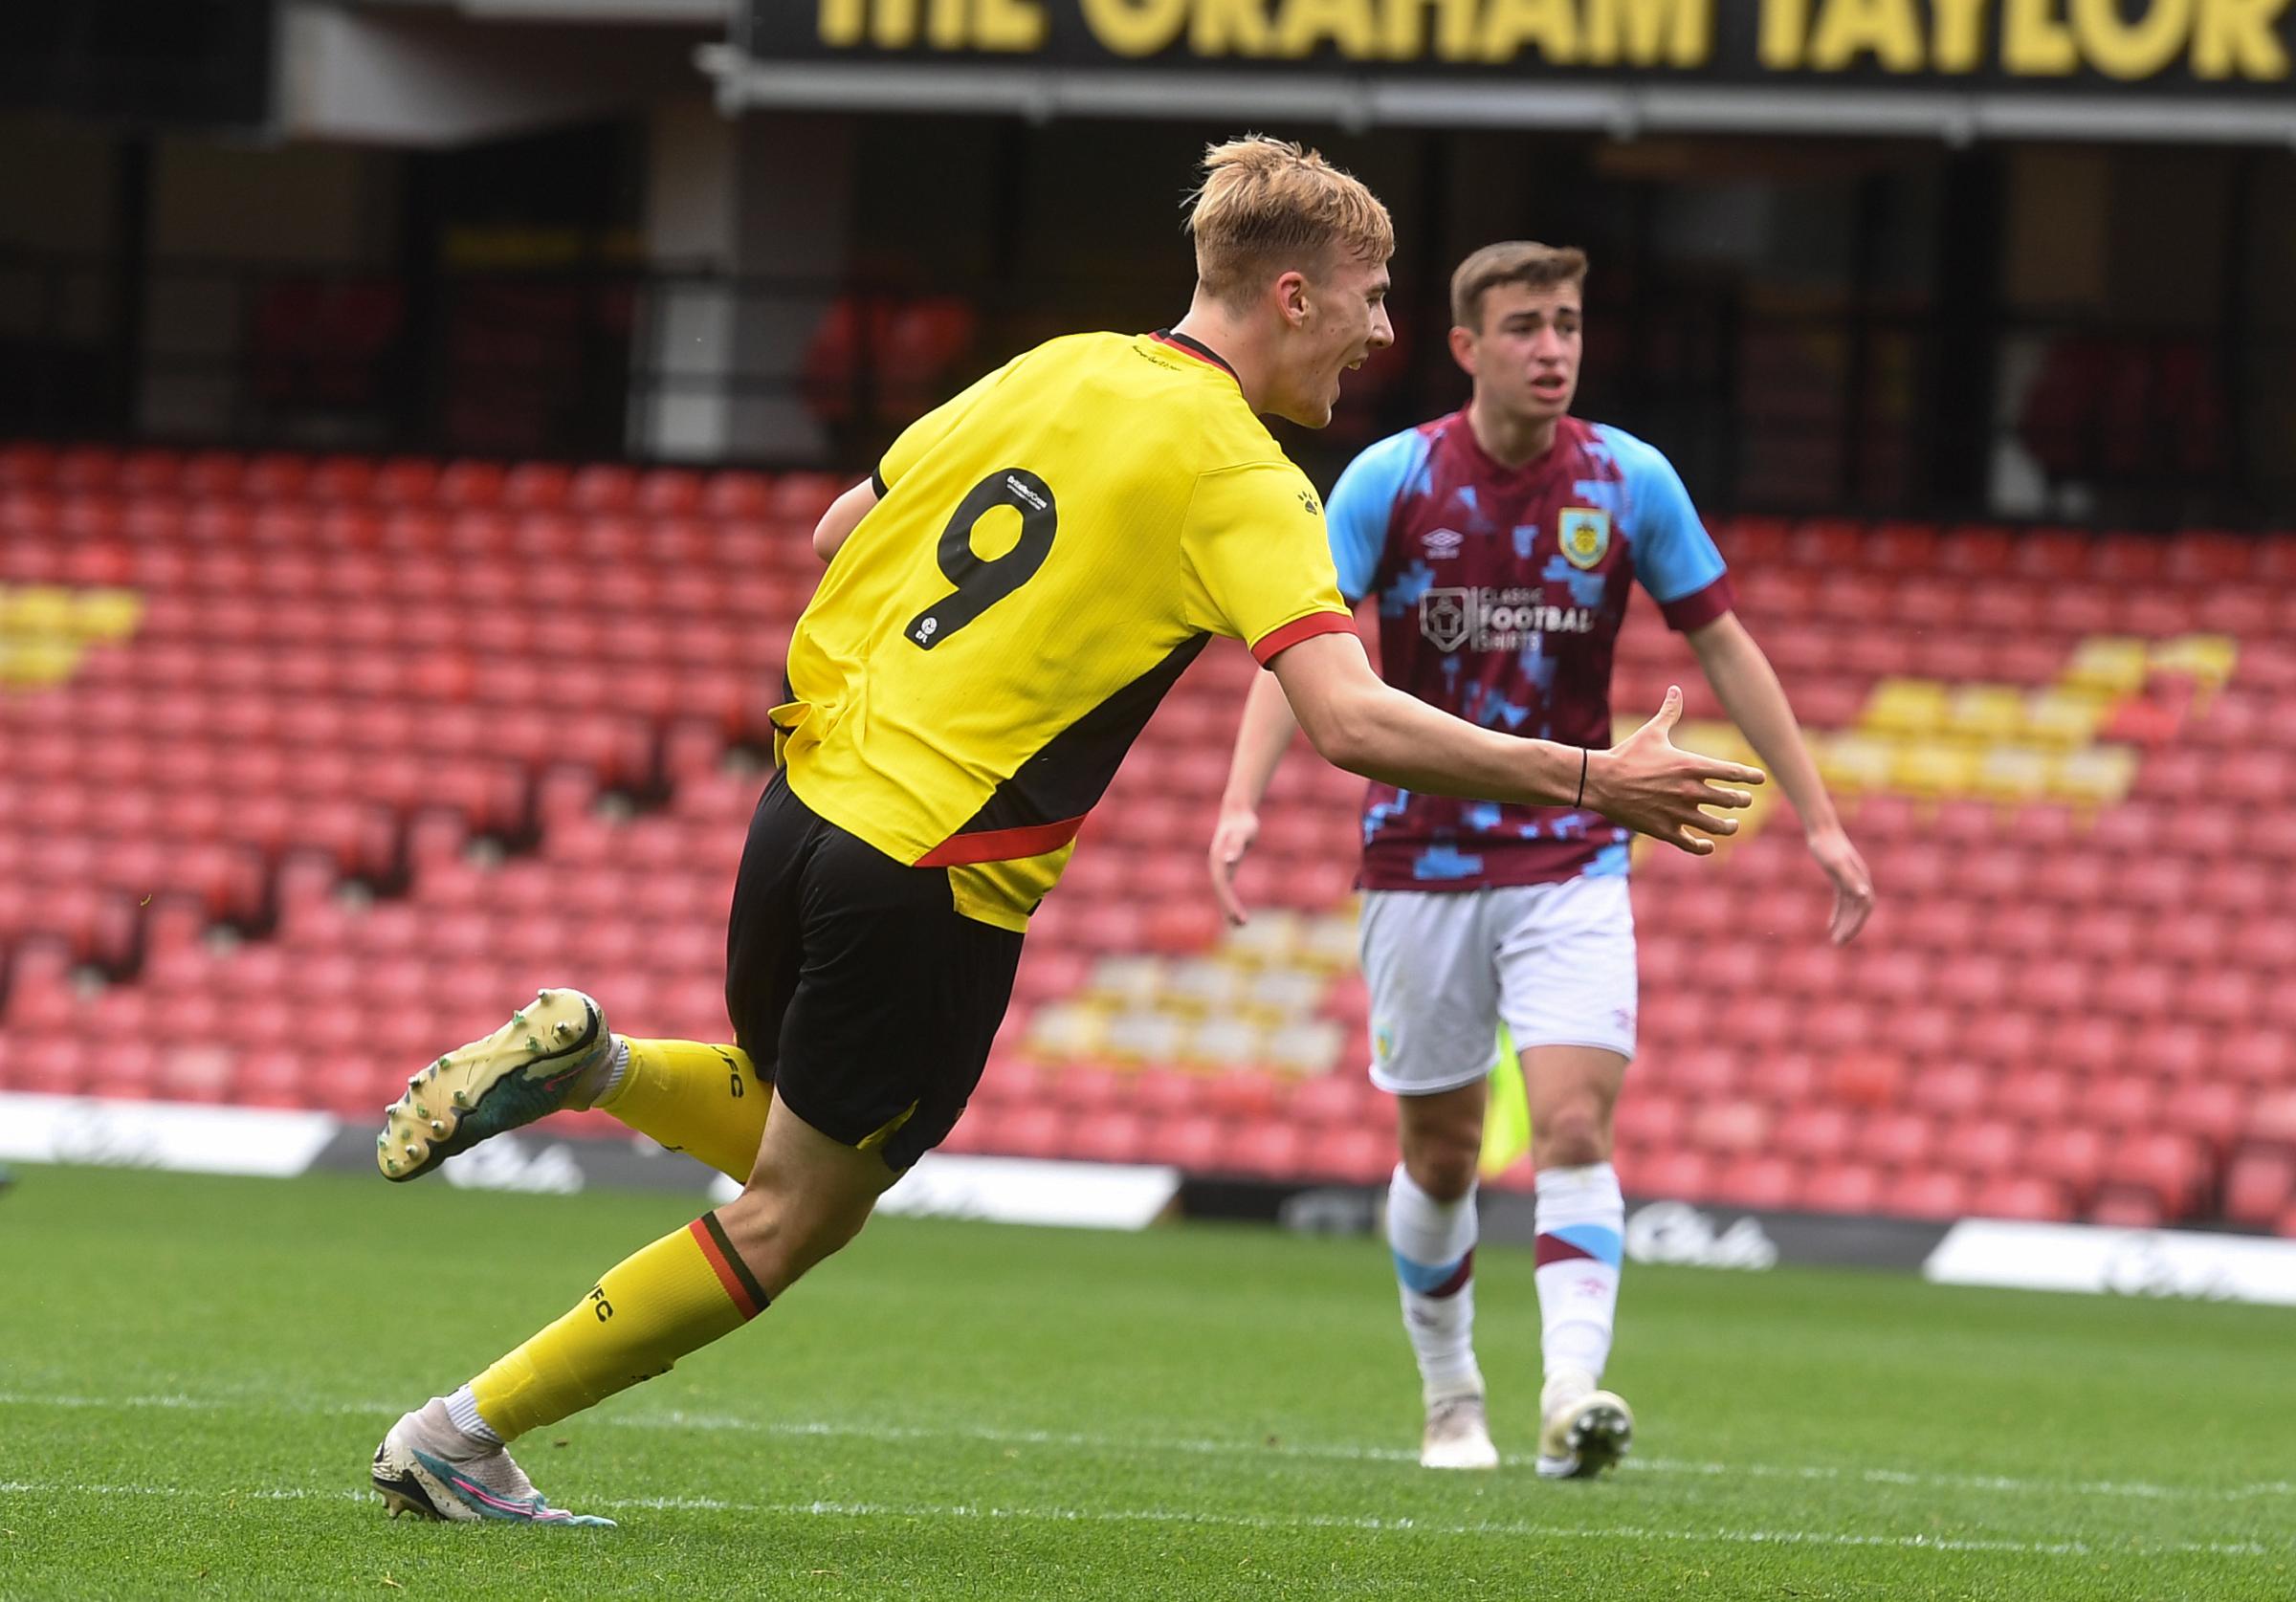 Entertaining but losing end for Watford's Under-21s